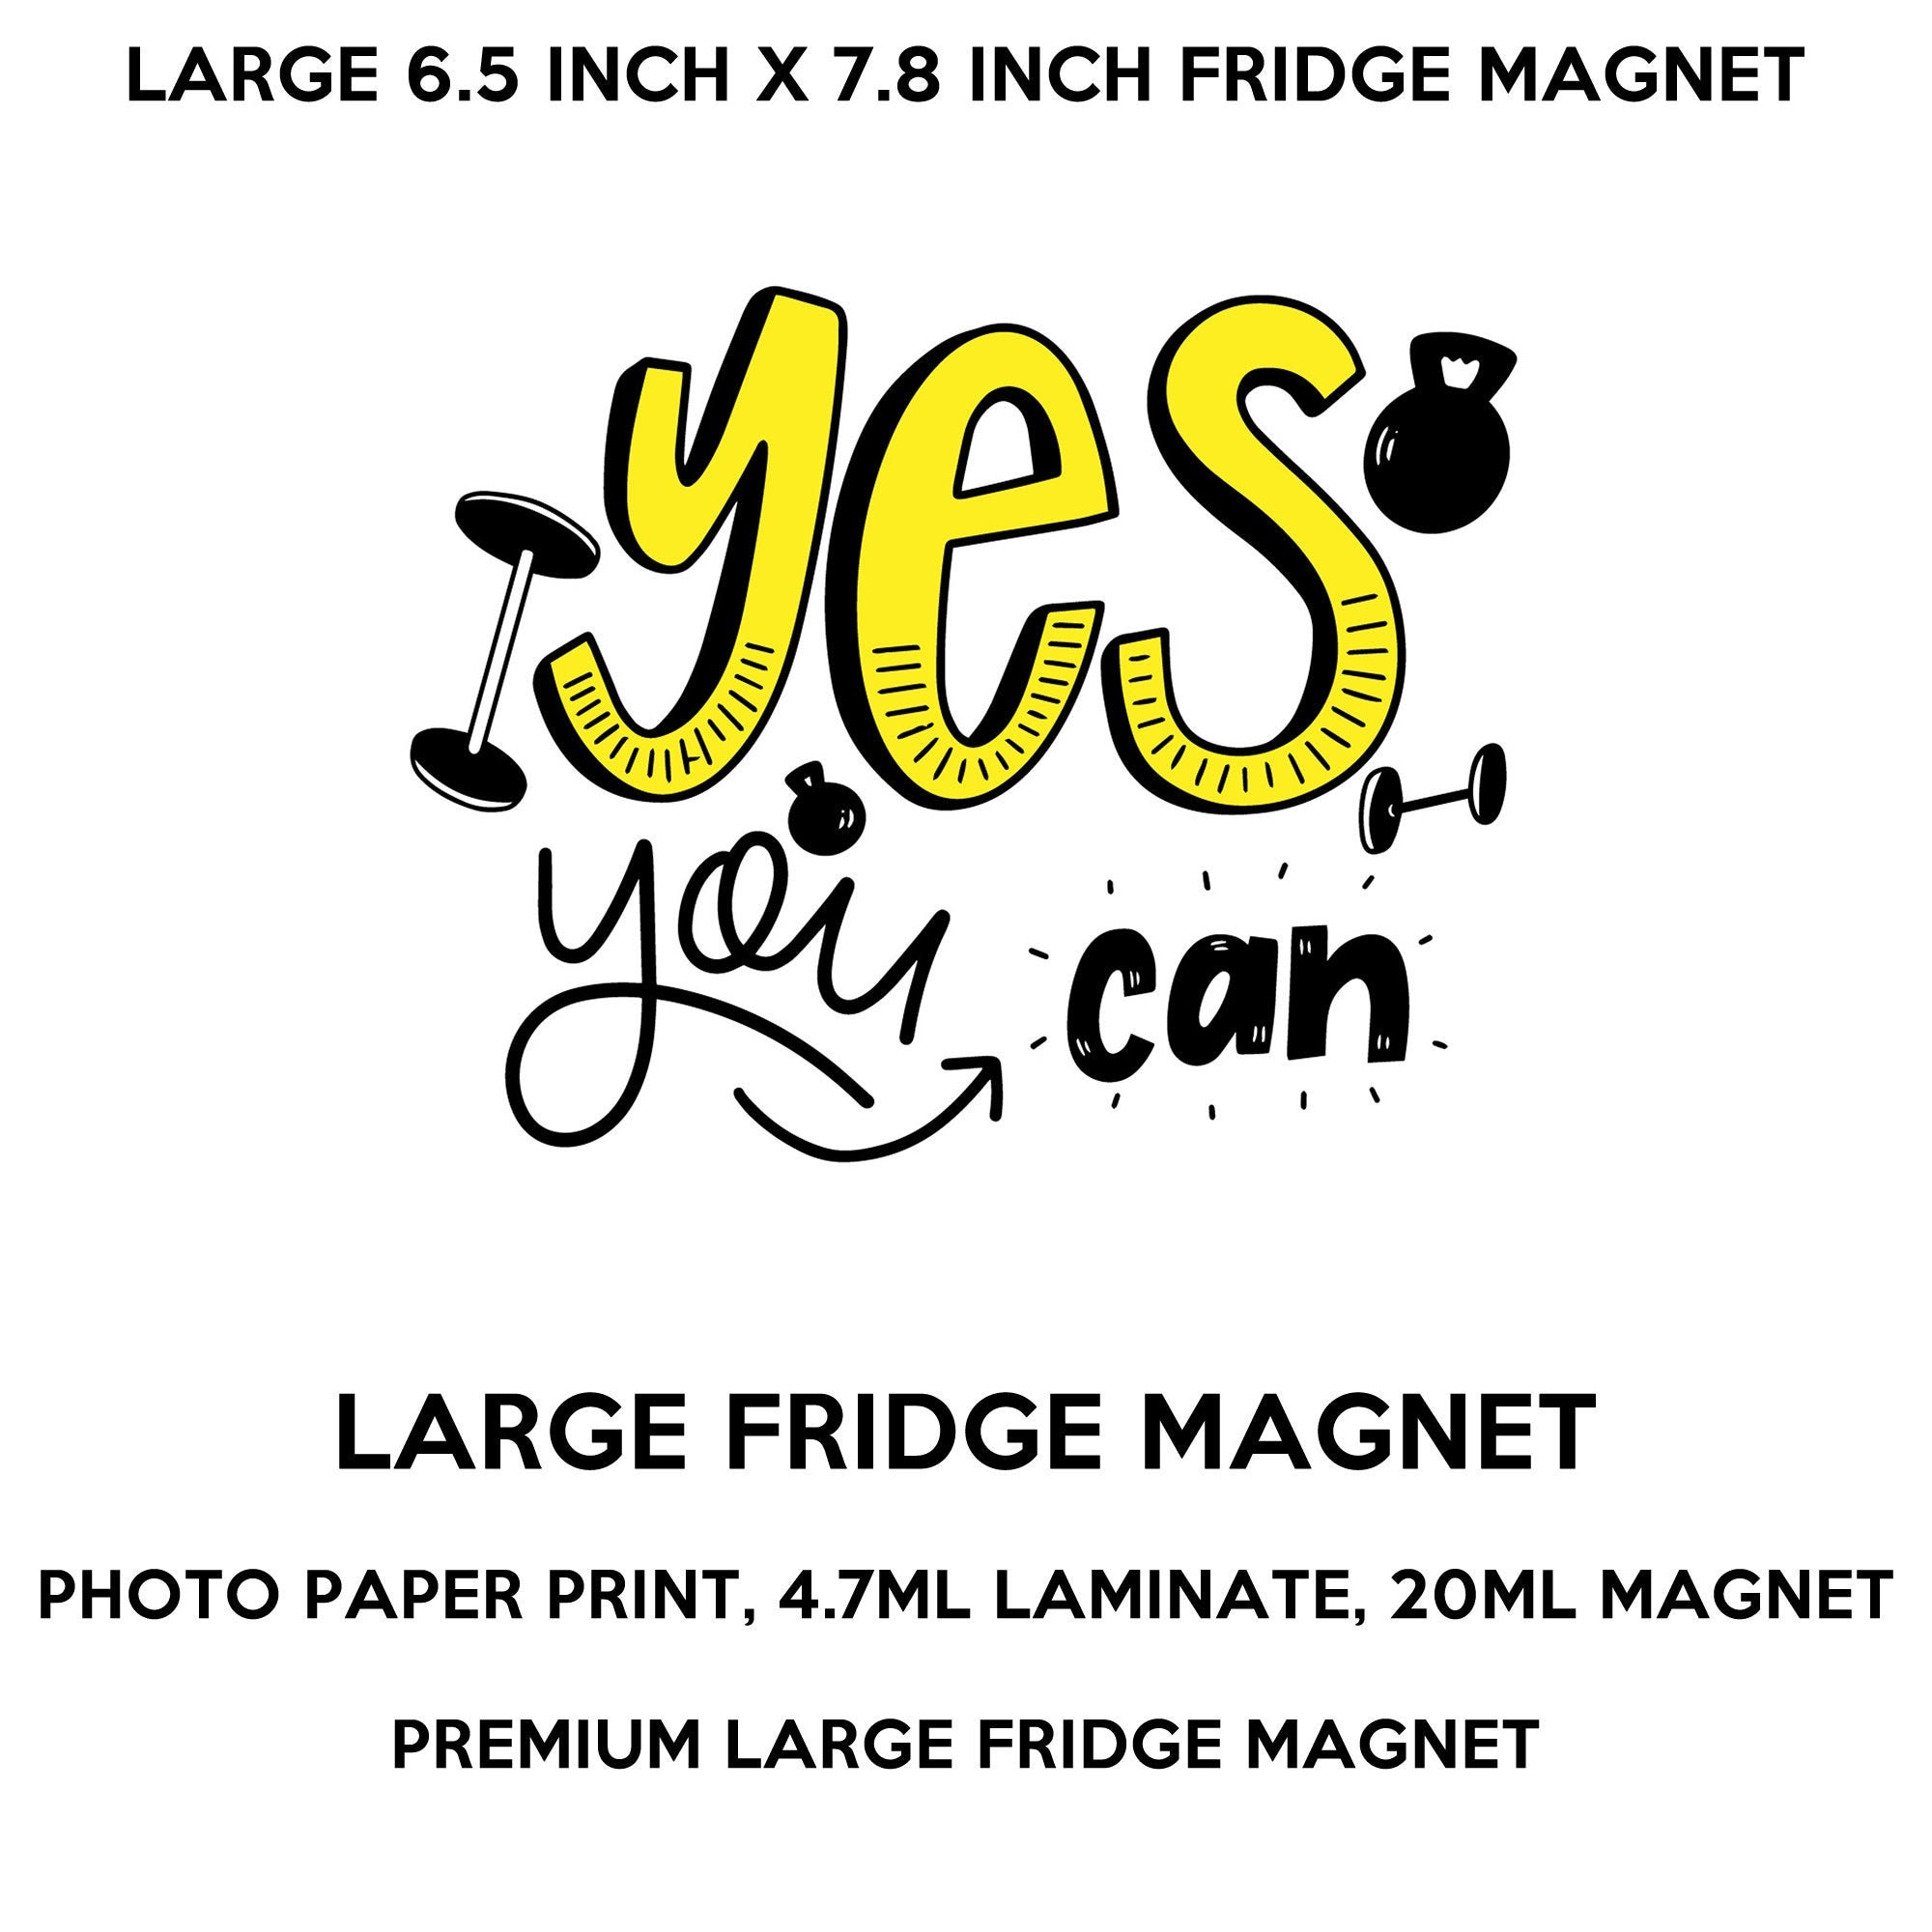 Yes You Can 6.5 high x 7.8 wide inch premium fridge magnet that stands out.